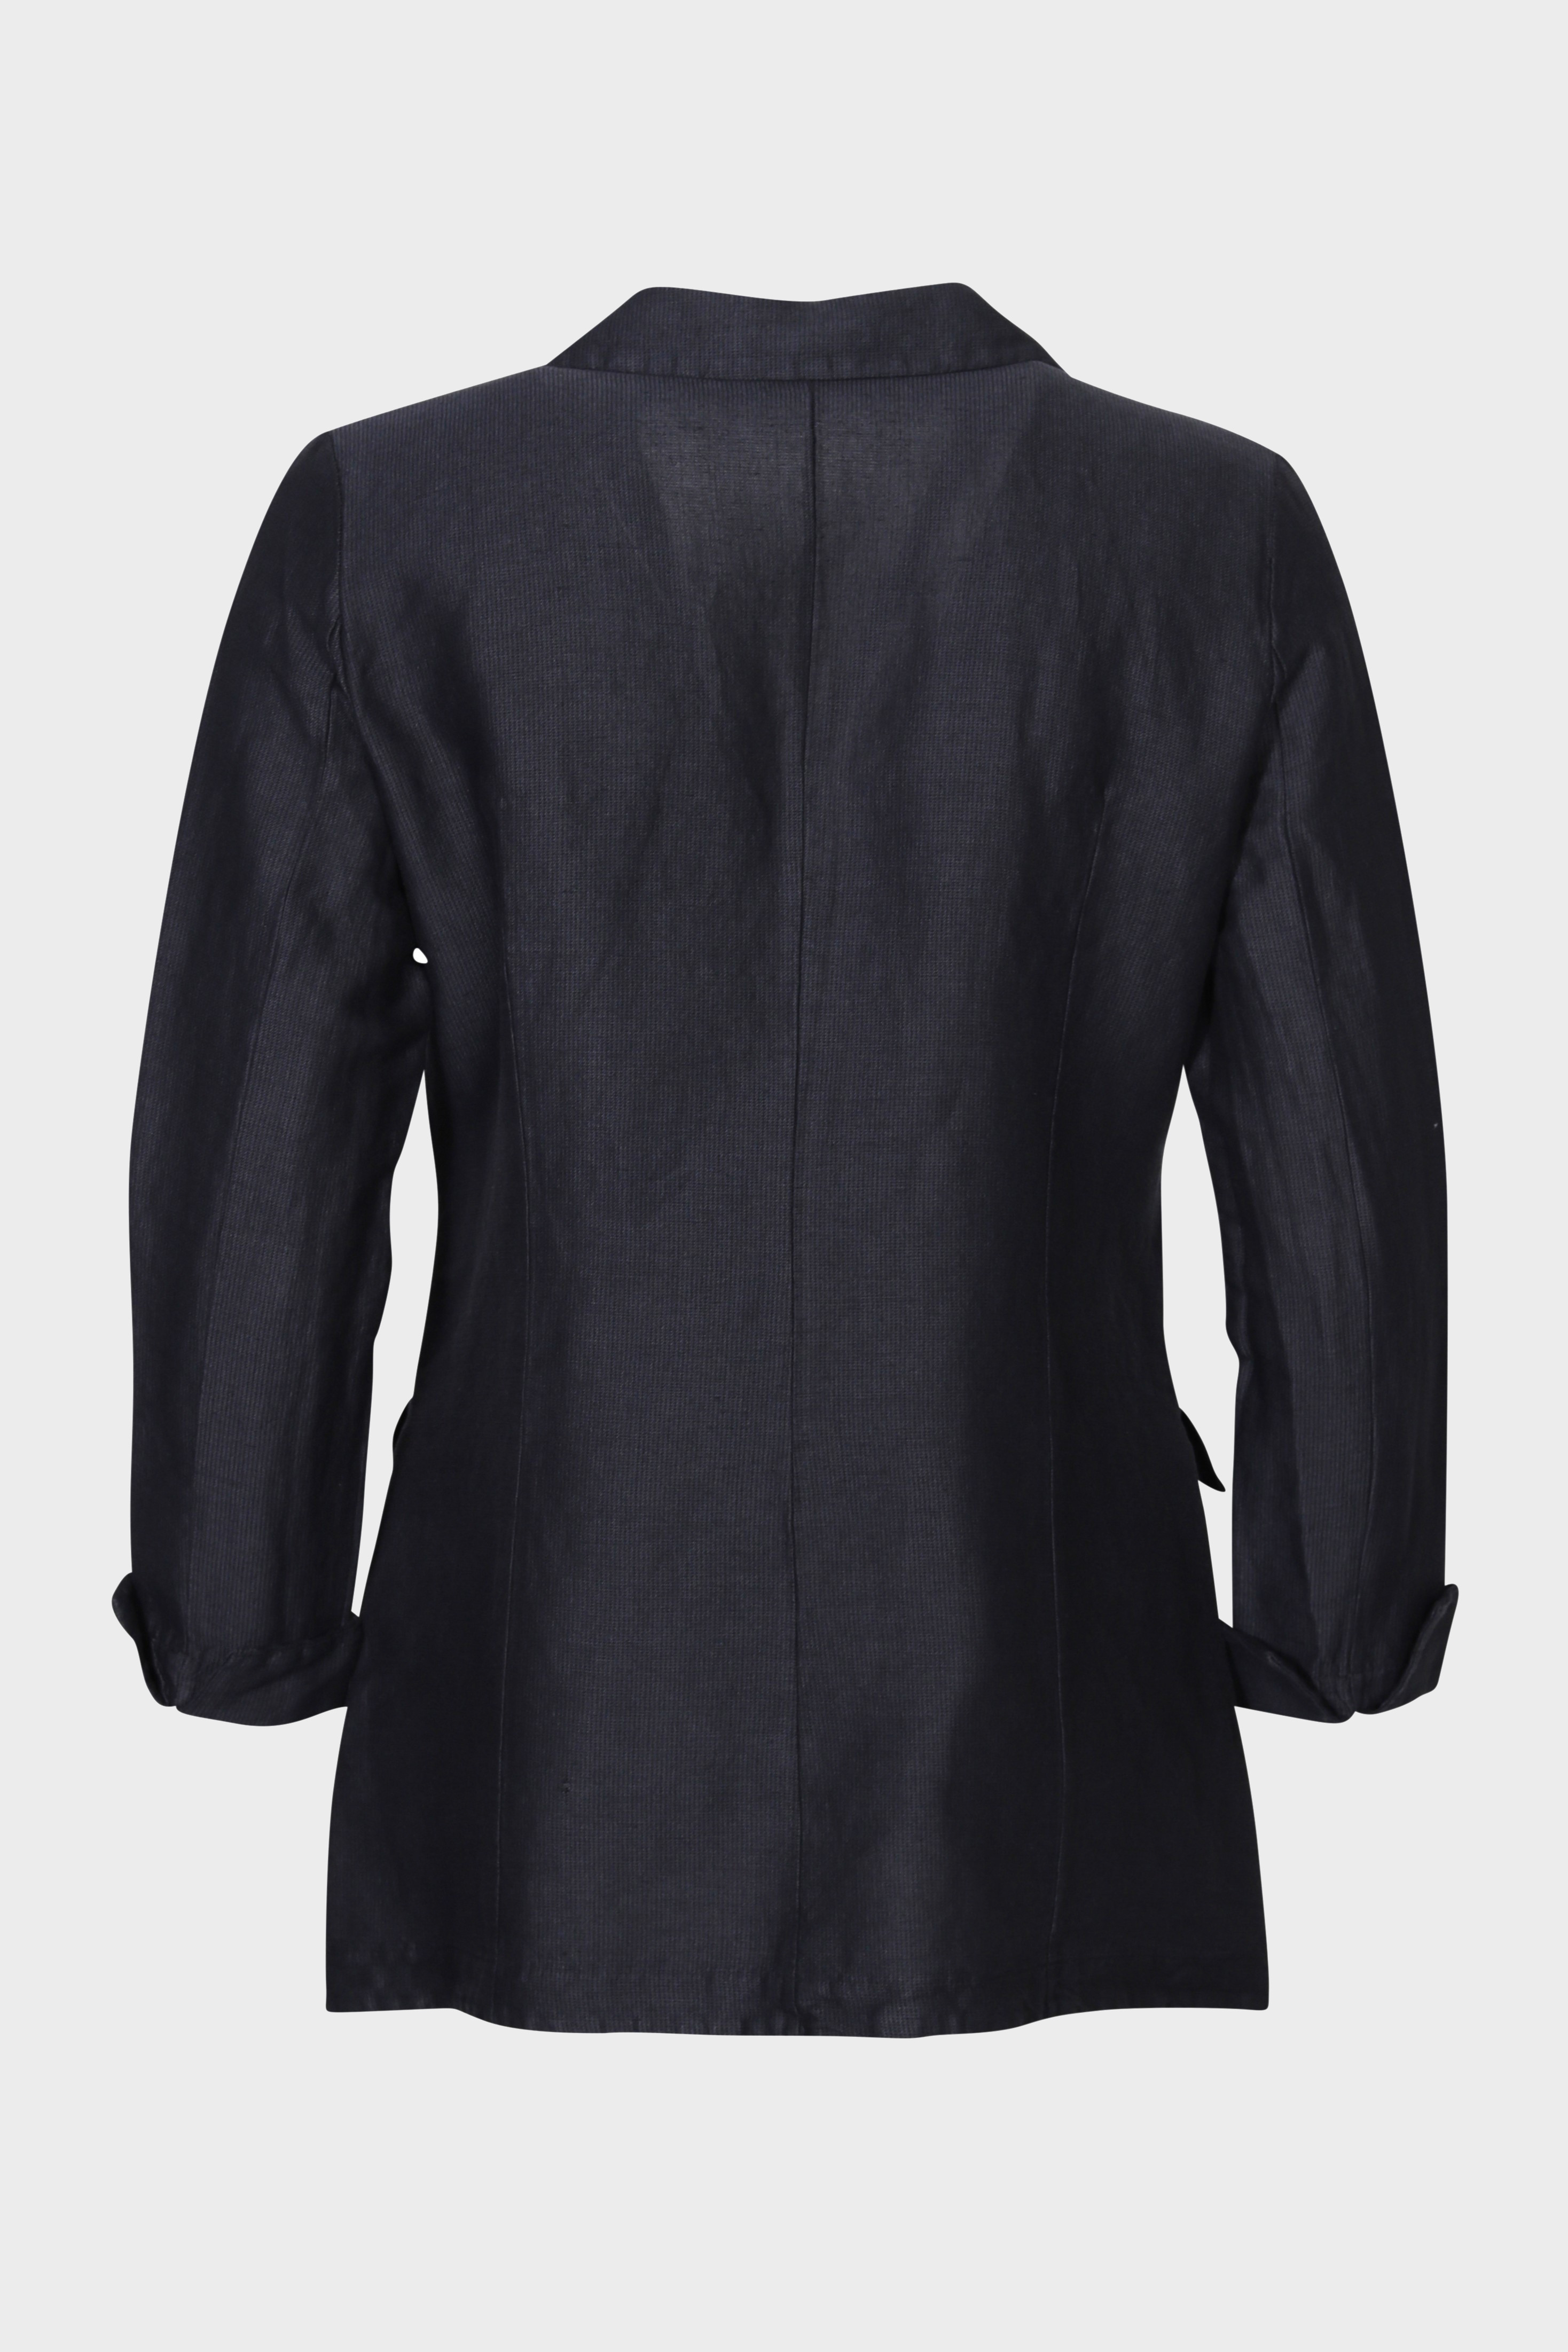 TRANSIT PAR SUCH Double Breasted Blazer in Navy Blue XS